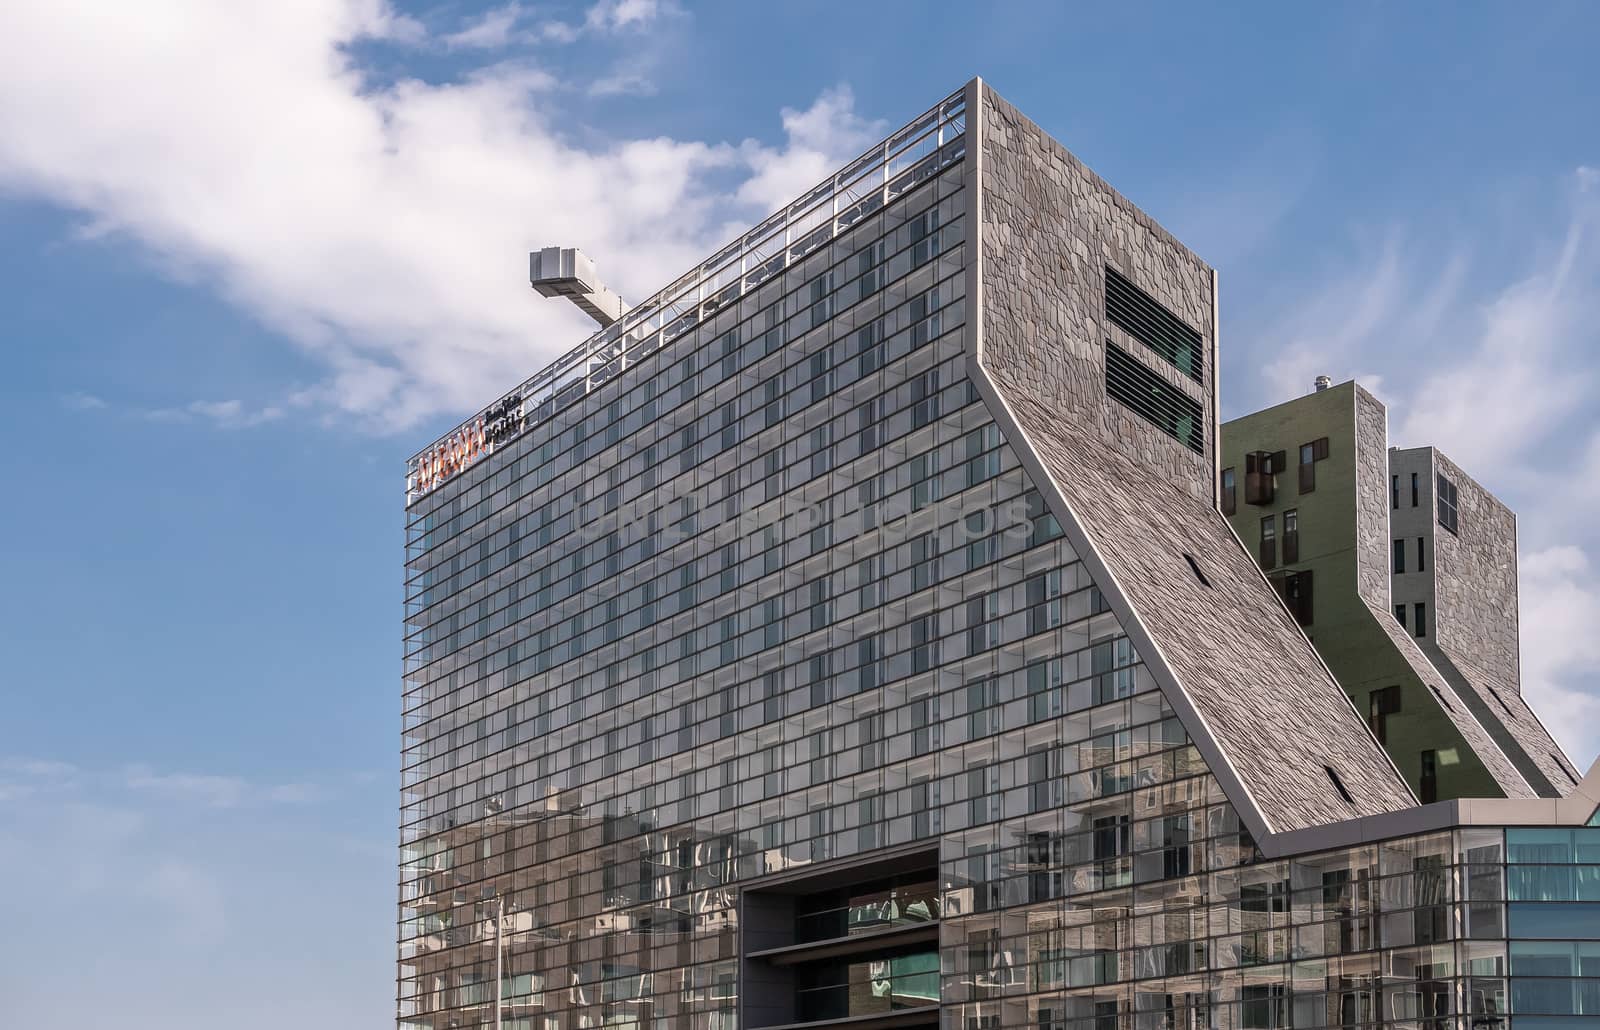 Amsterdam, the Netherlands - June 30, 2019: Modern architecture Building with gray glass wall of Mate Aitana Hotel on IJdok under blue sky with white clouds.